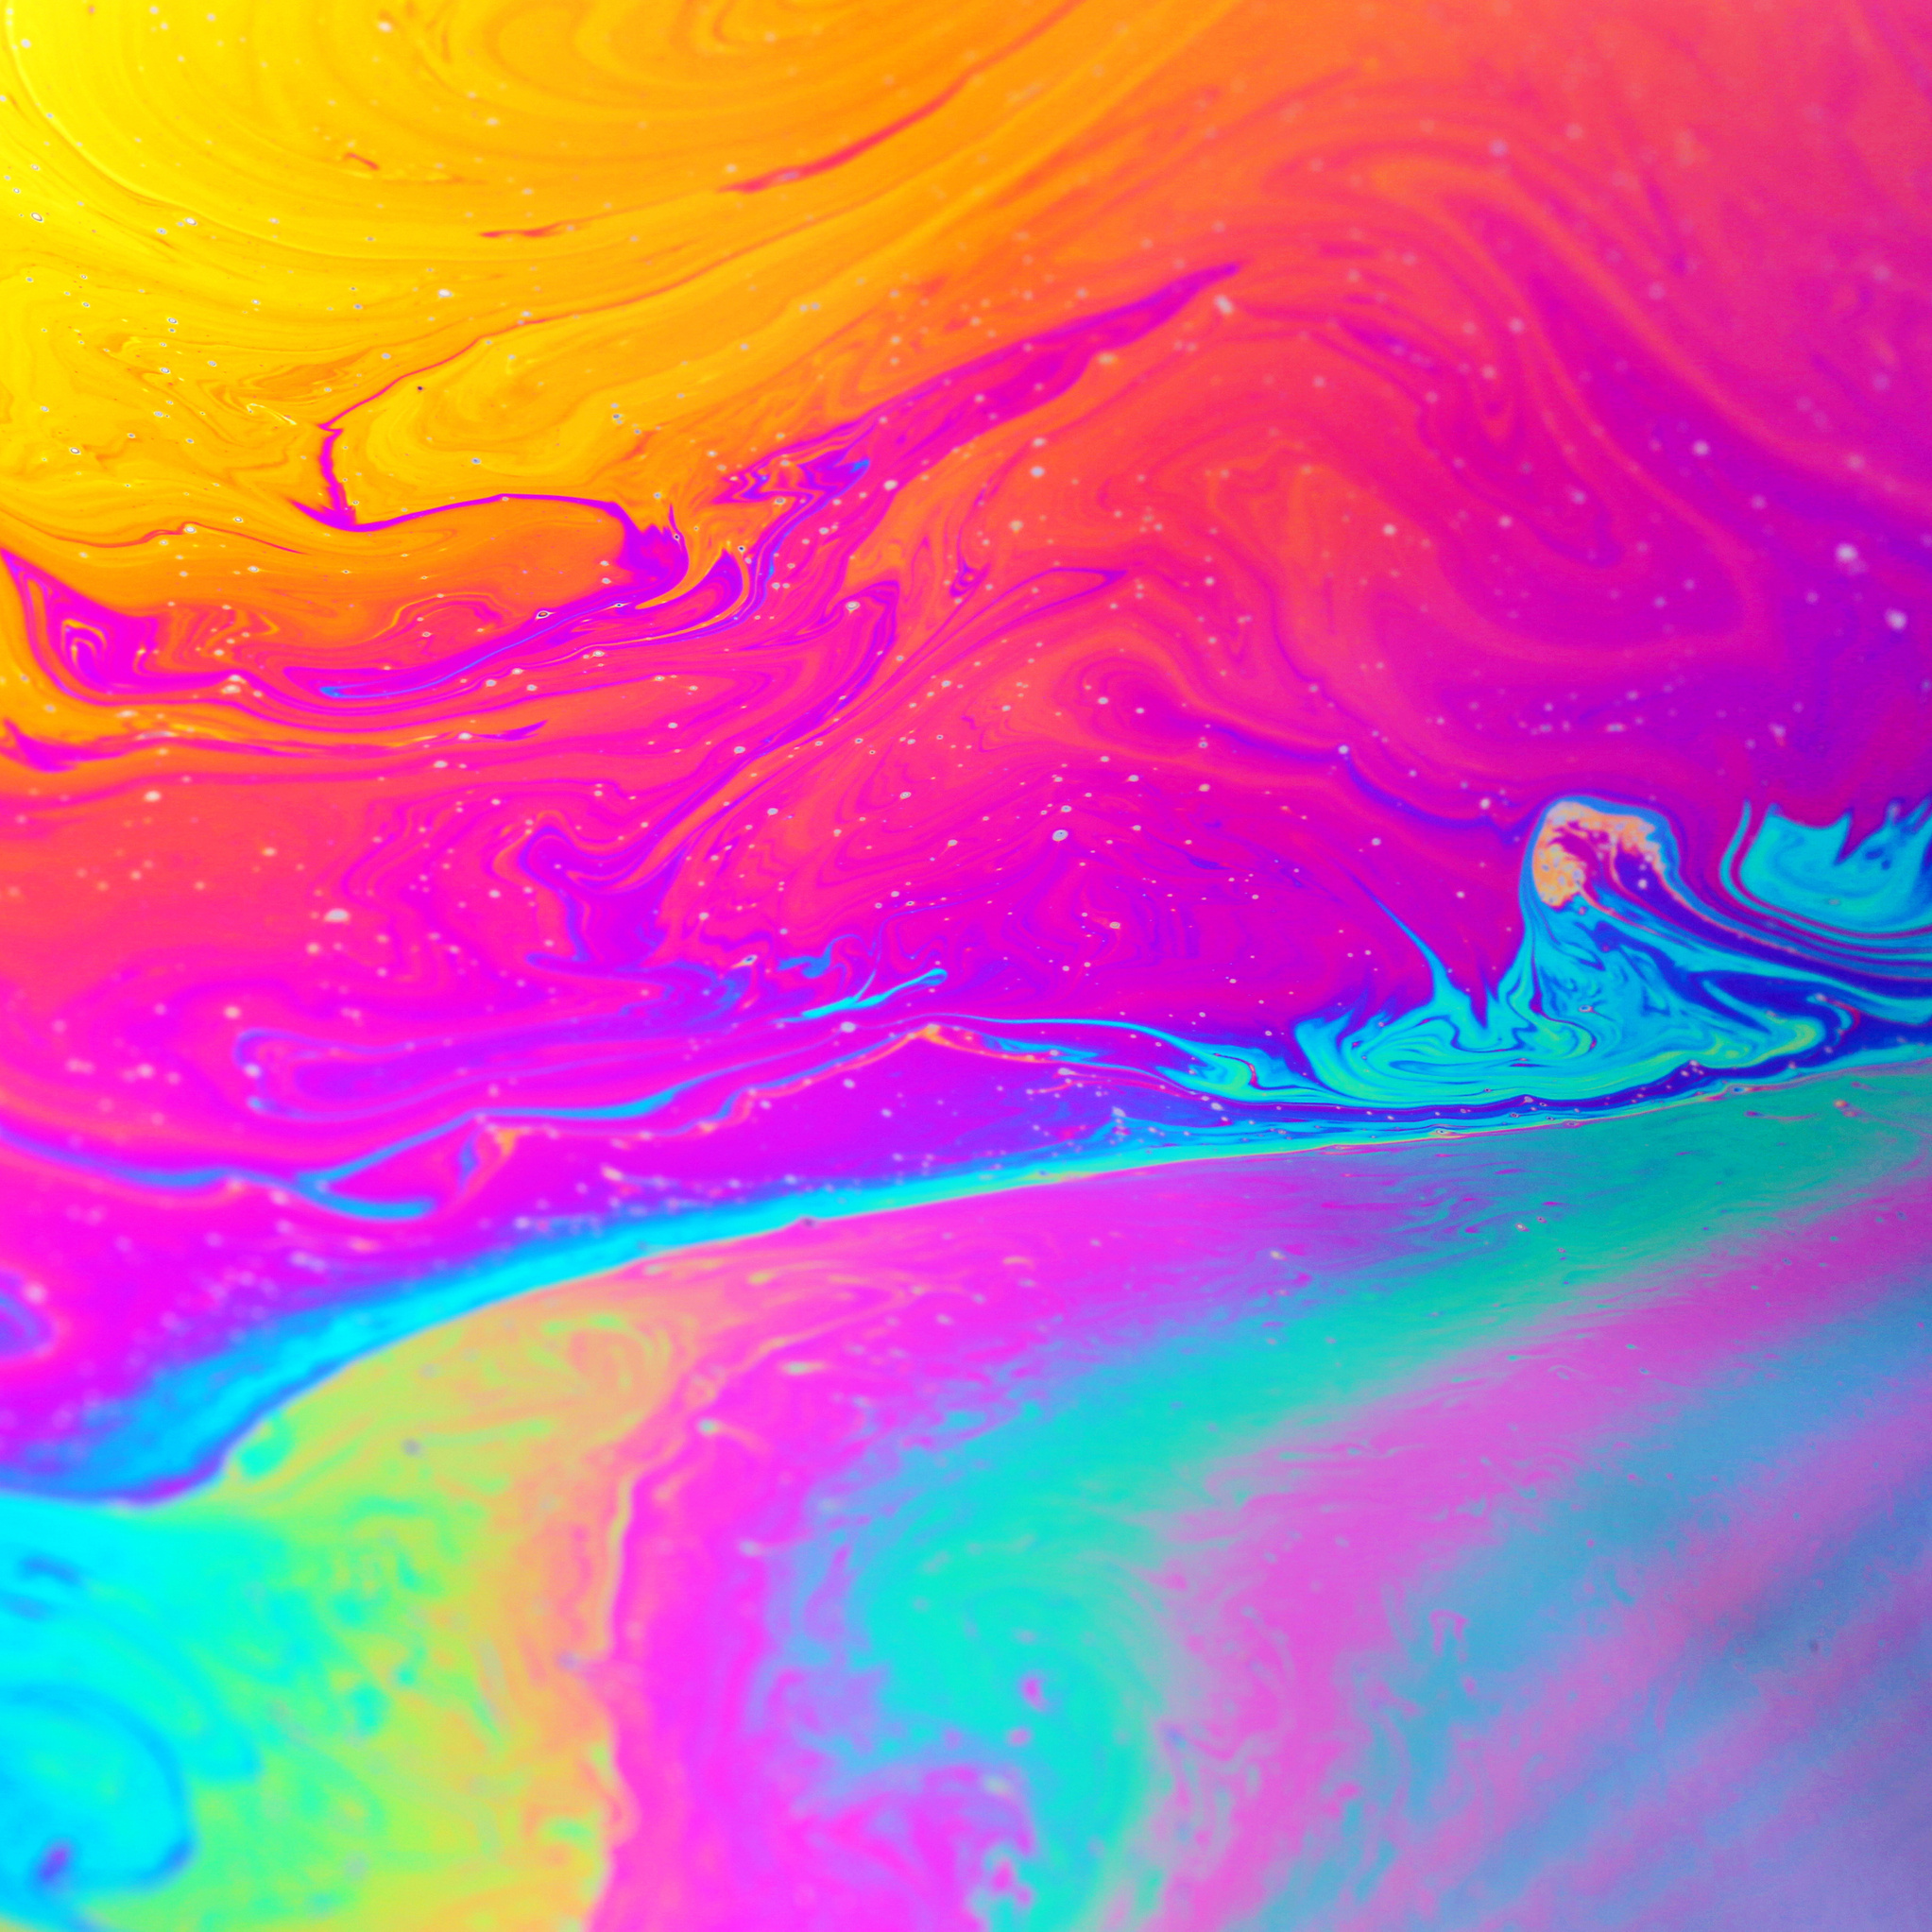 Rainbow colors created by soap, bubble, or oil makes